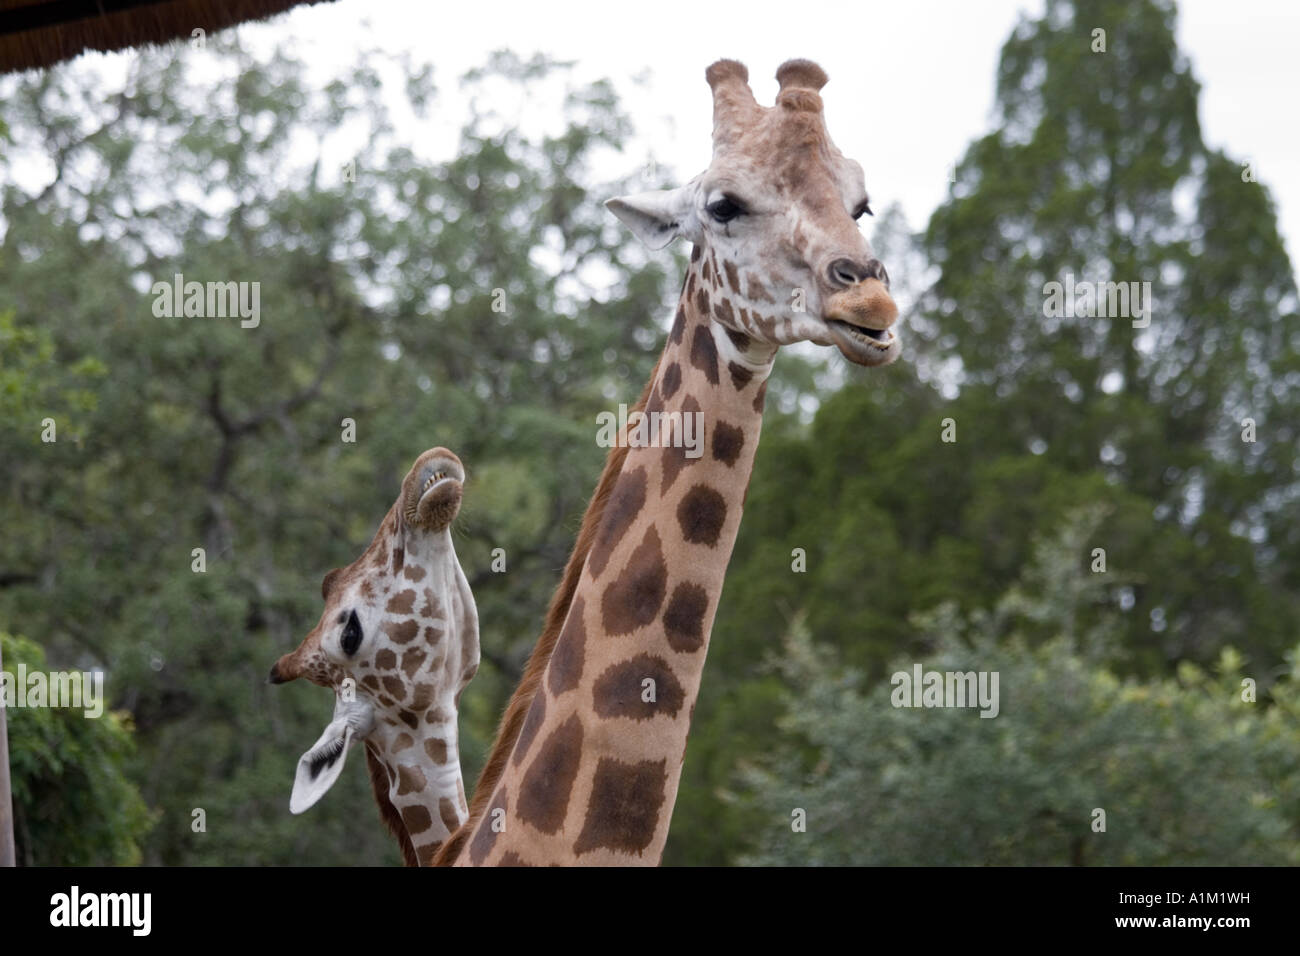 Adult and Juvenile Young Giraffe Close-up Head Shots in Wooded Background at Busch Gardens Theme Park Stock Photo